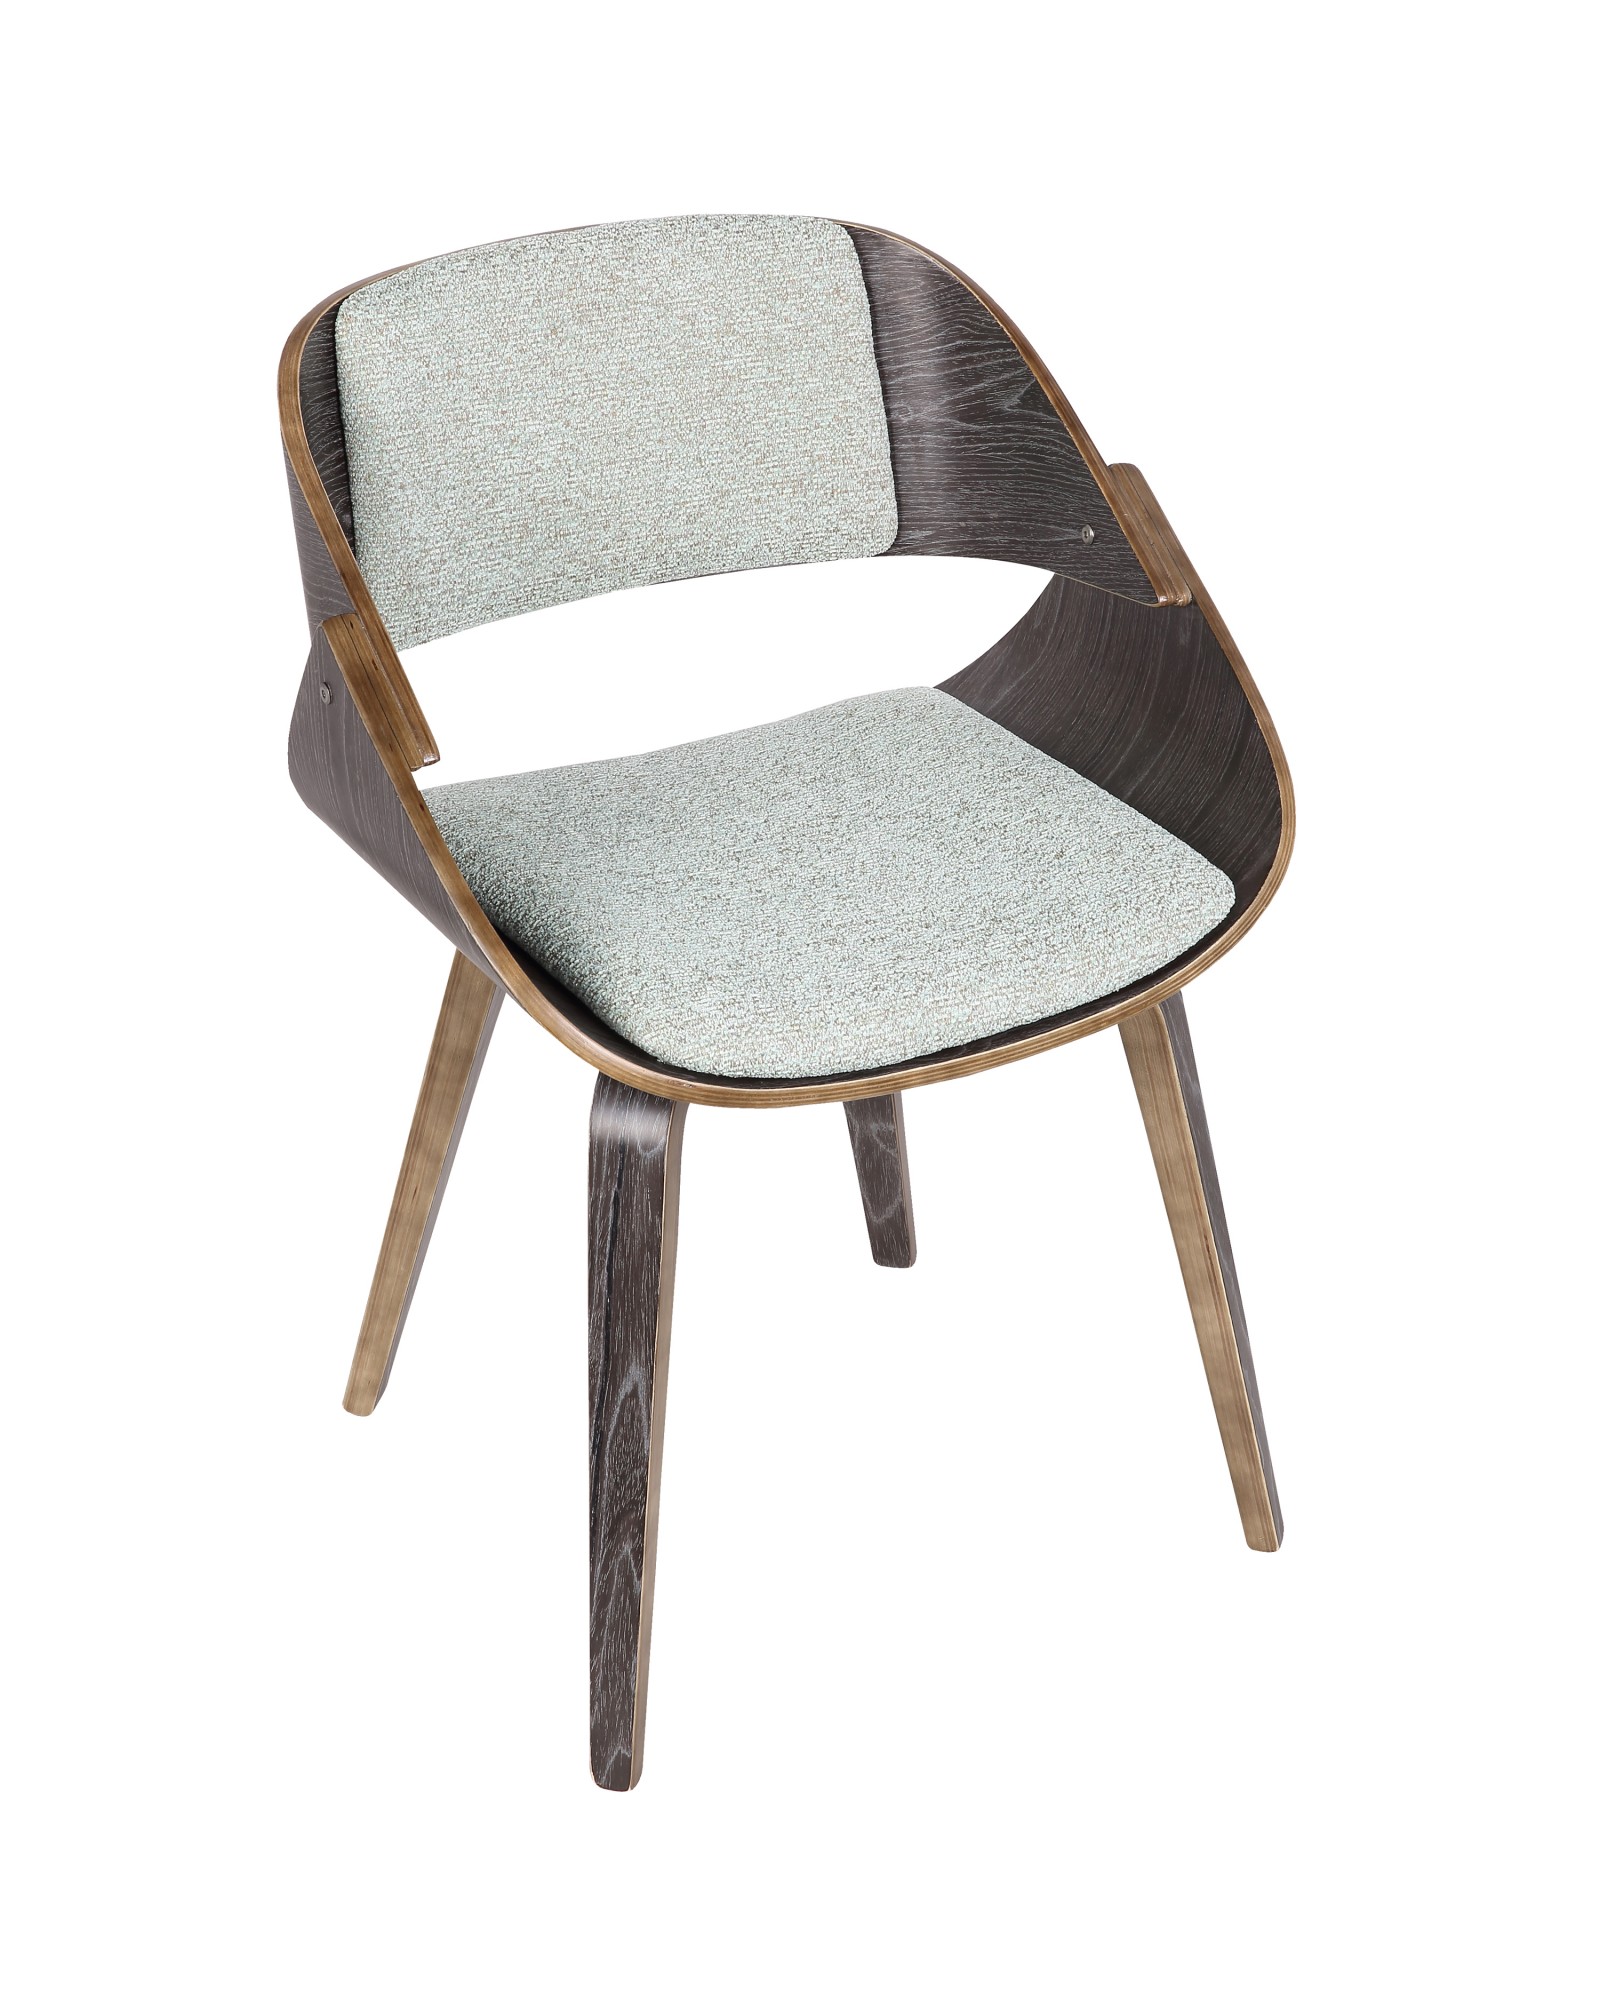 Fortunato Mid-Century Modern Dining/Accent Chair in Dark Grey Wood with Green Fabric